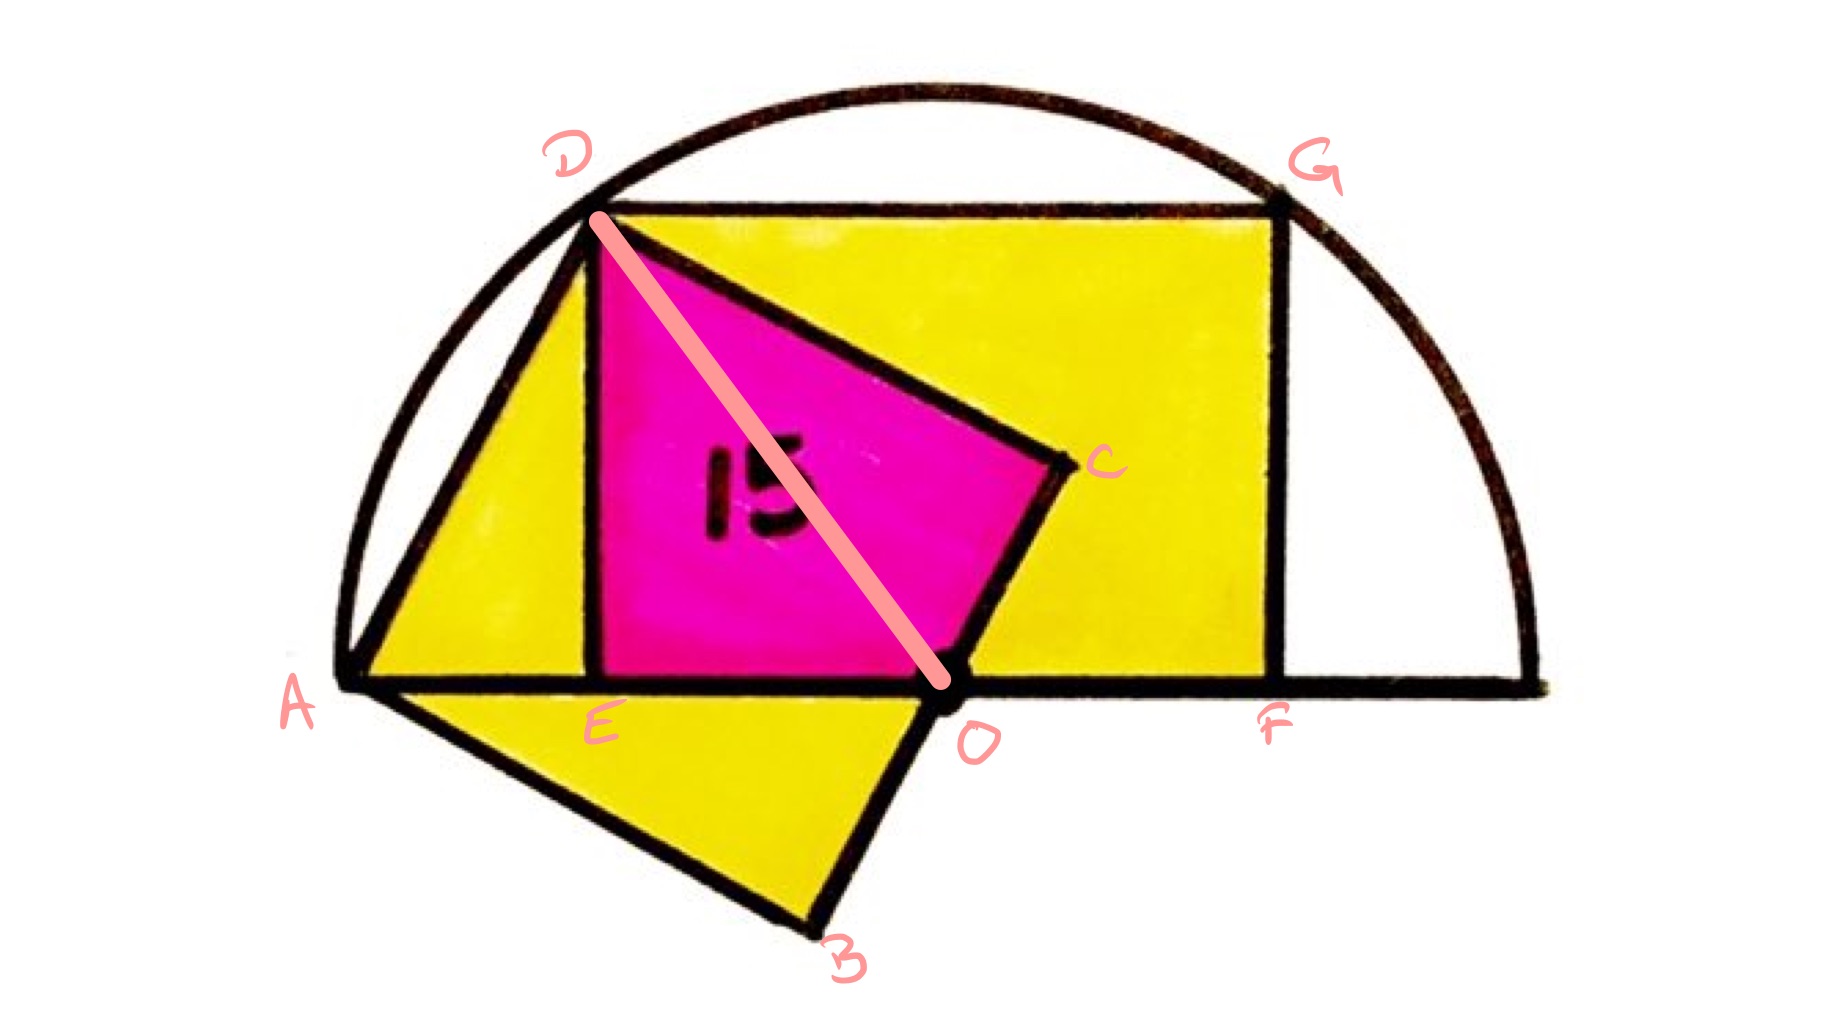 Square and rectangle in a semi-circle labelled